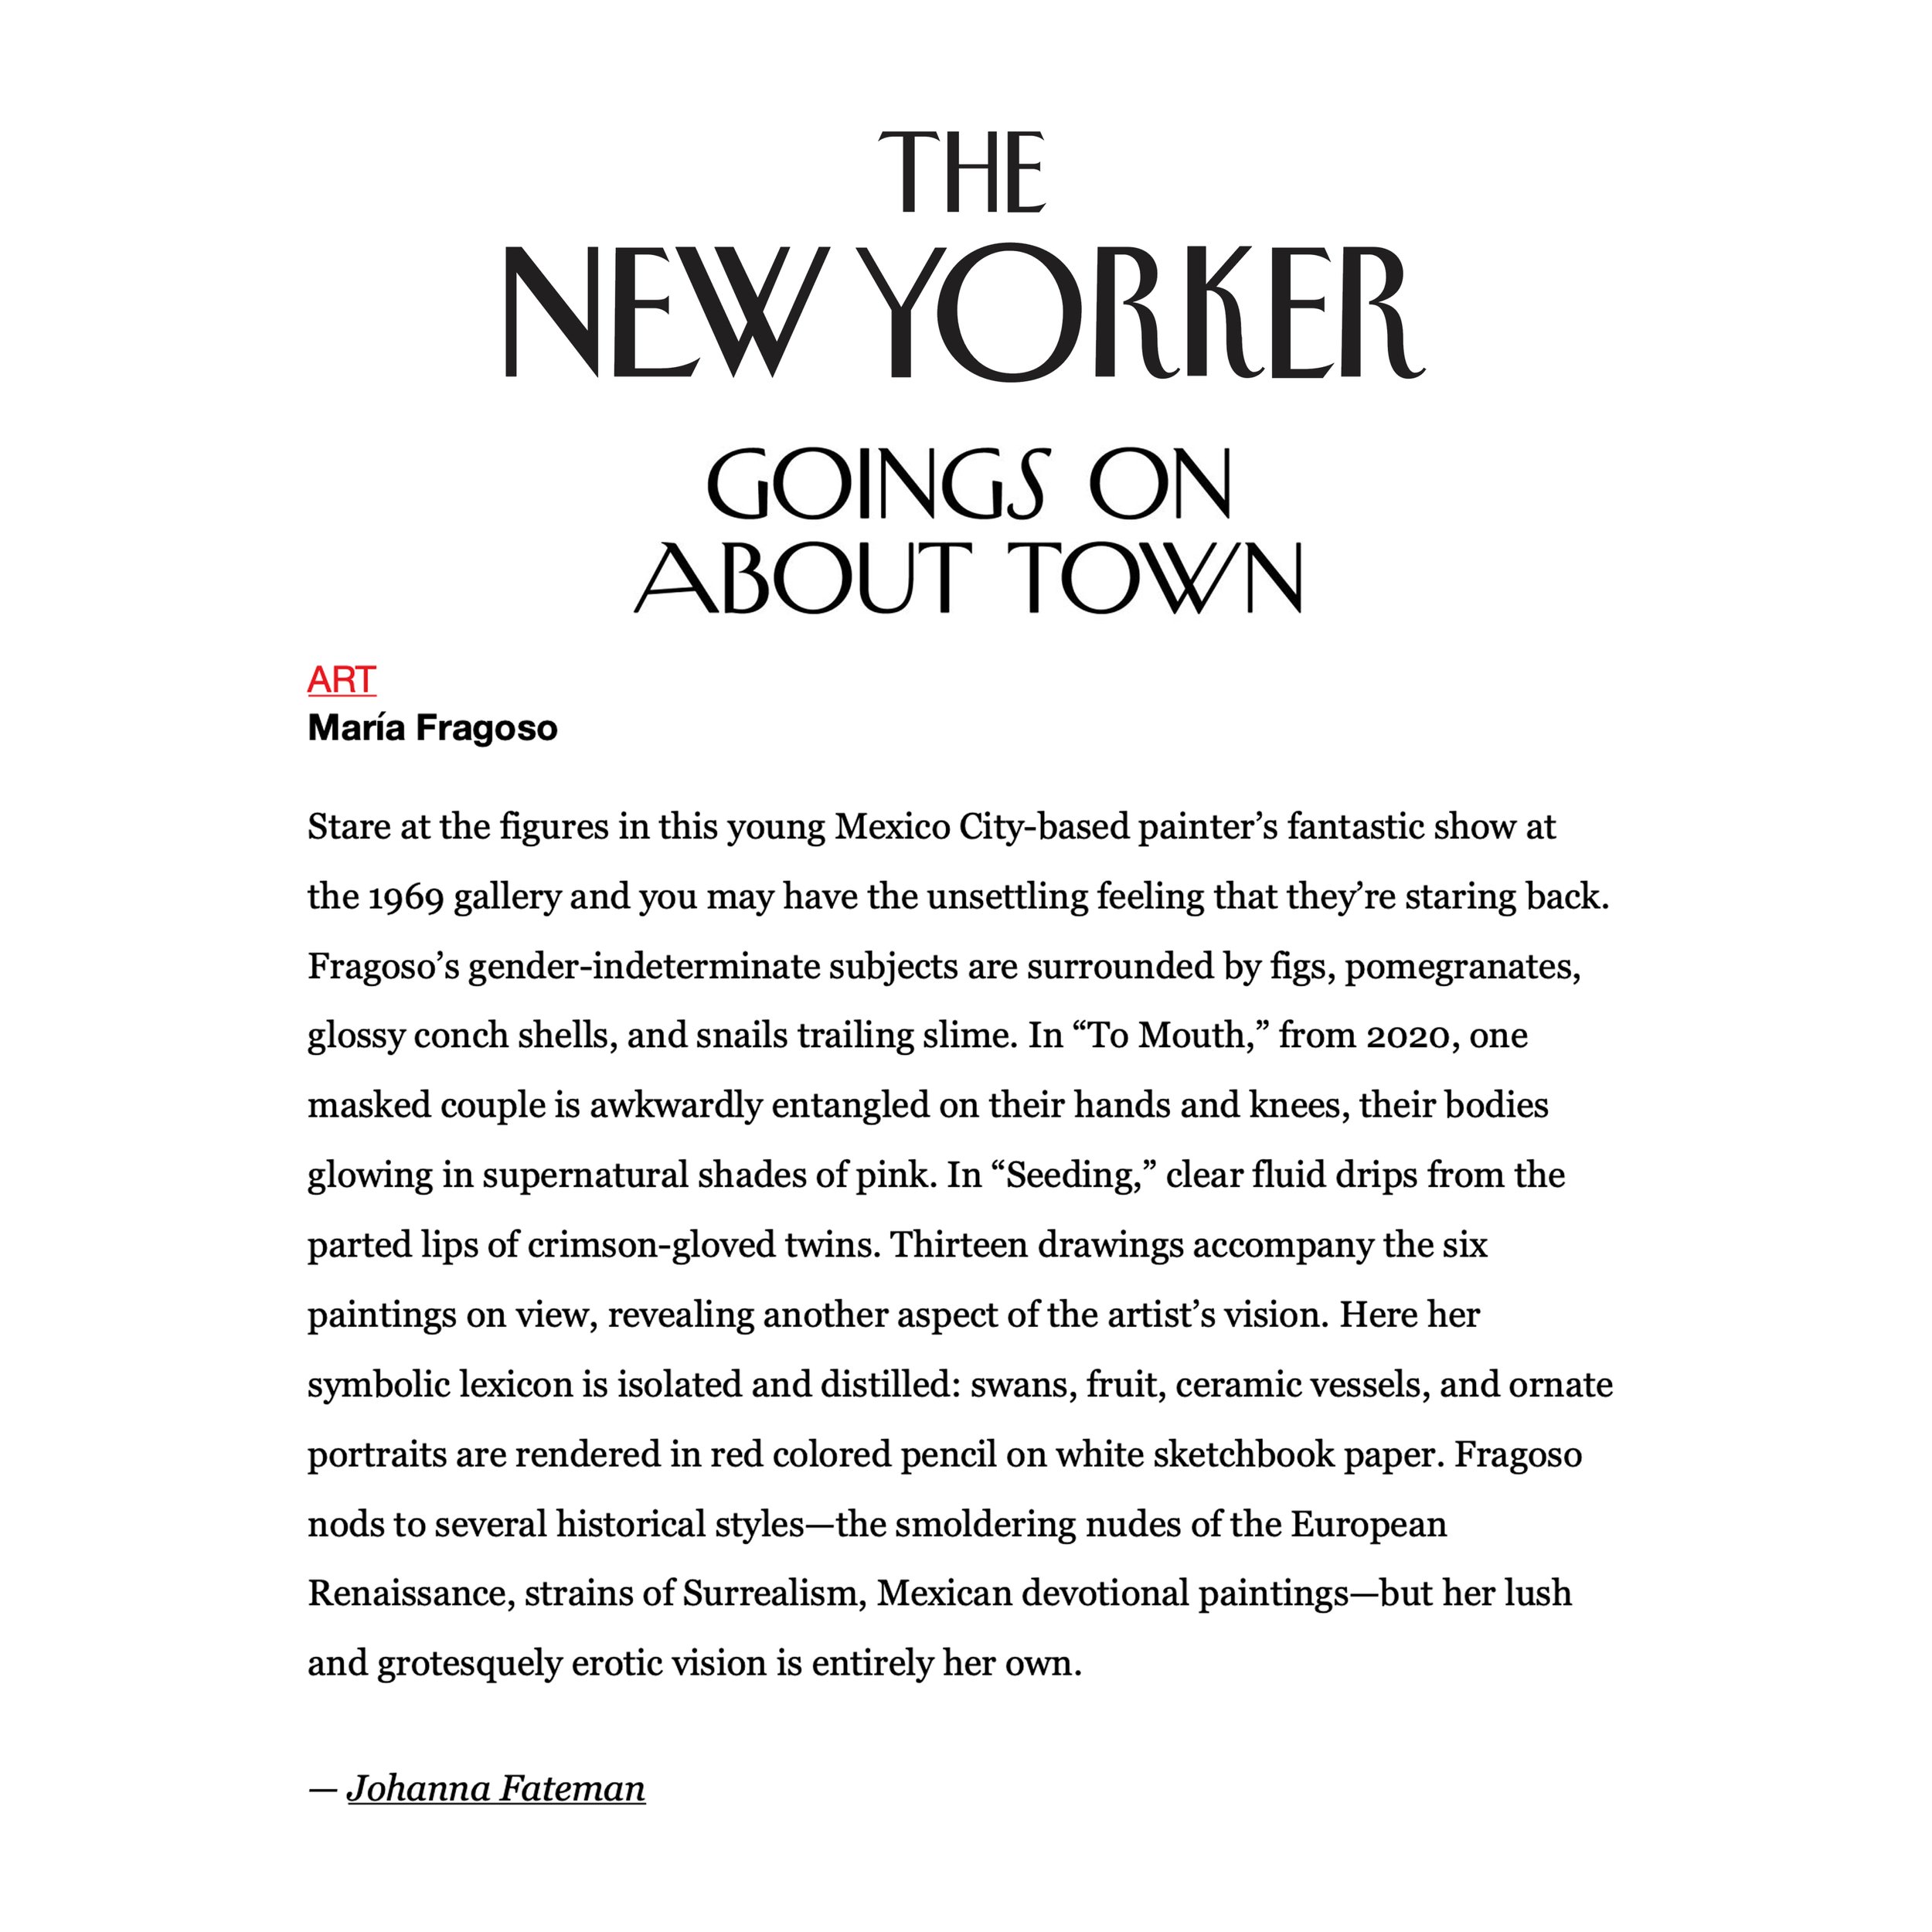 THE NEW YORKER - MARCH 2021